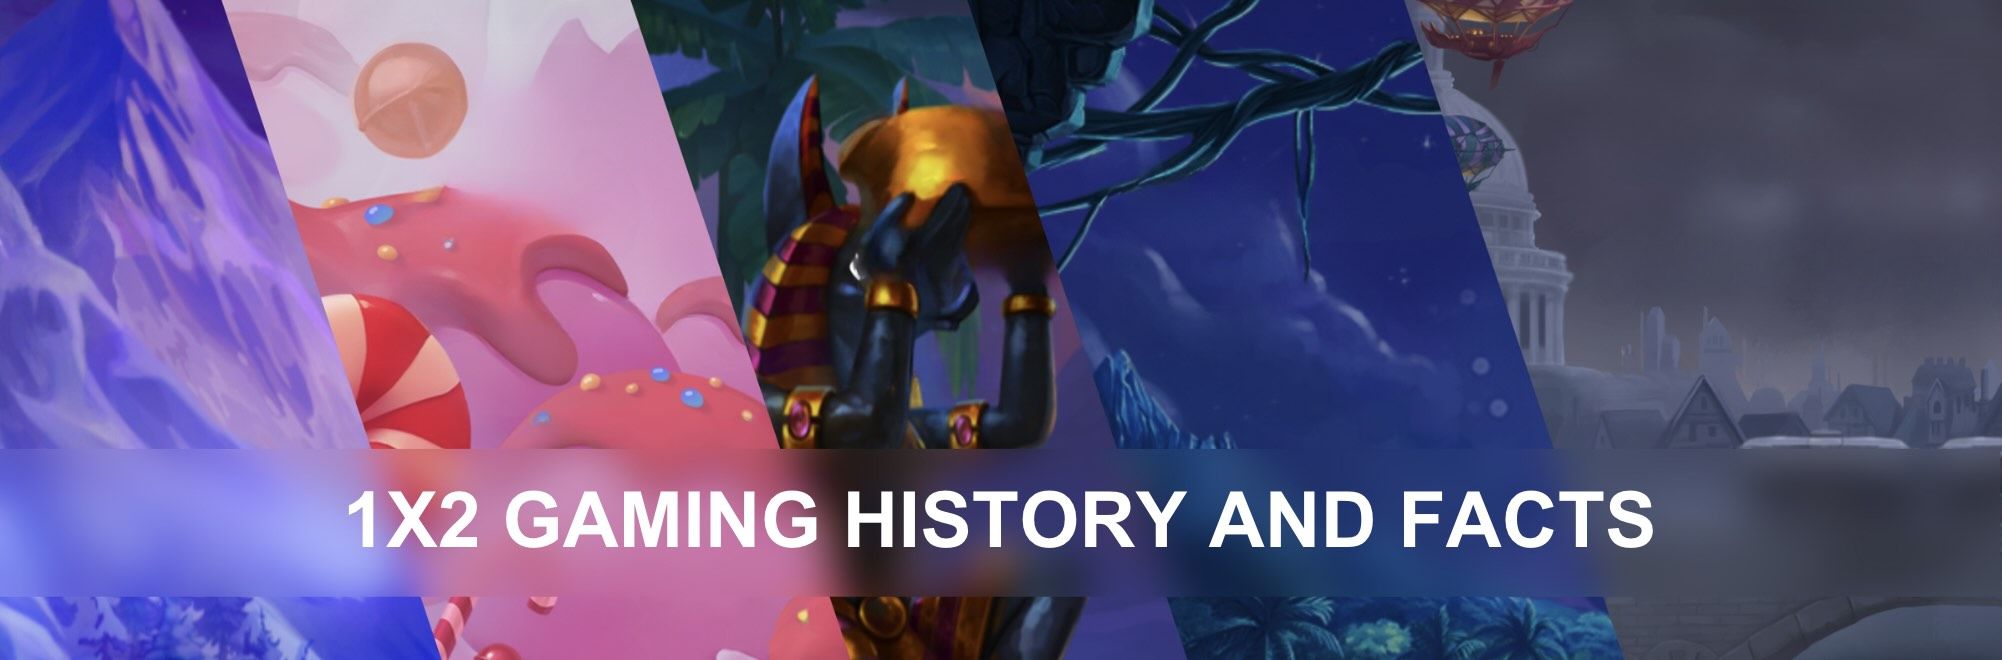 Image of 1x2 Gaming History and Facts